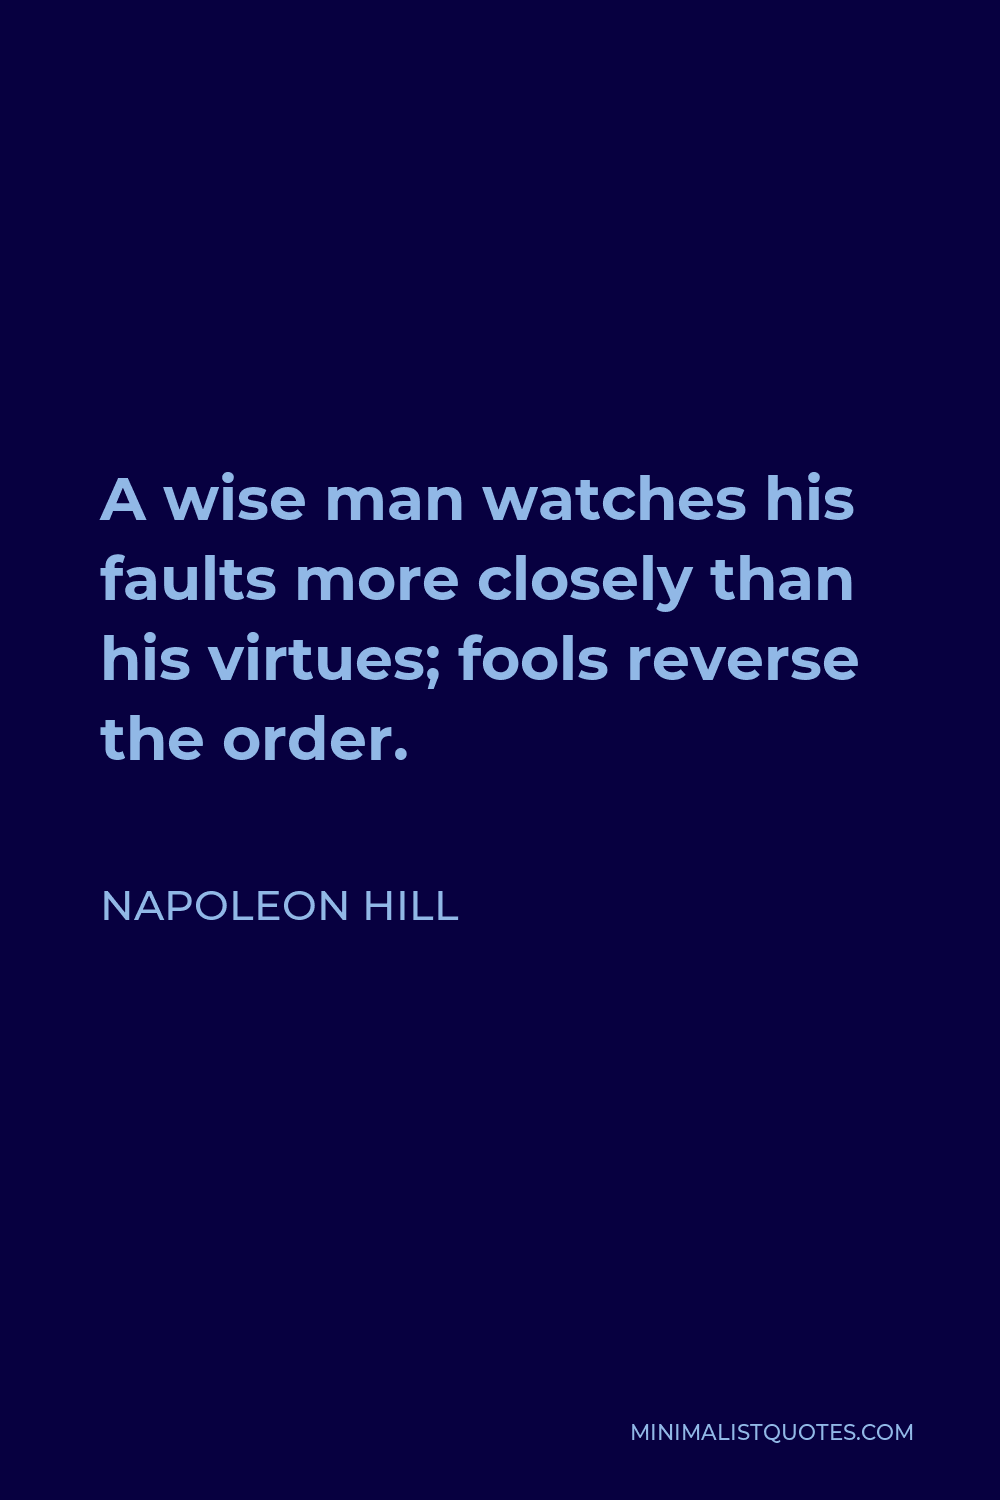 Napoleon Hill Quote - A wise man watches his faults more closely than his virtues; fools reverse the order.